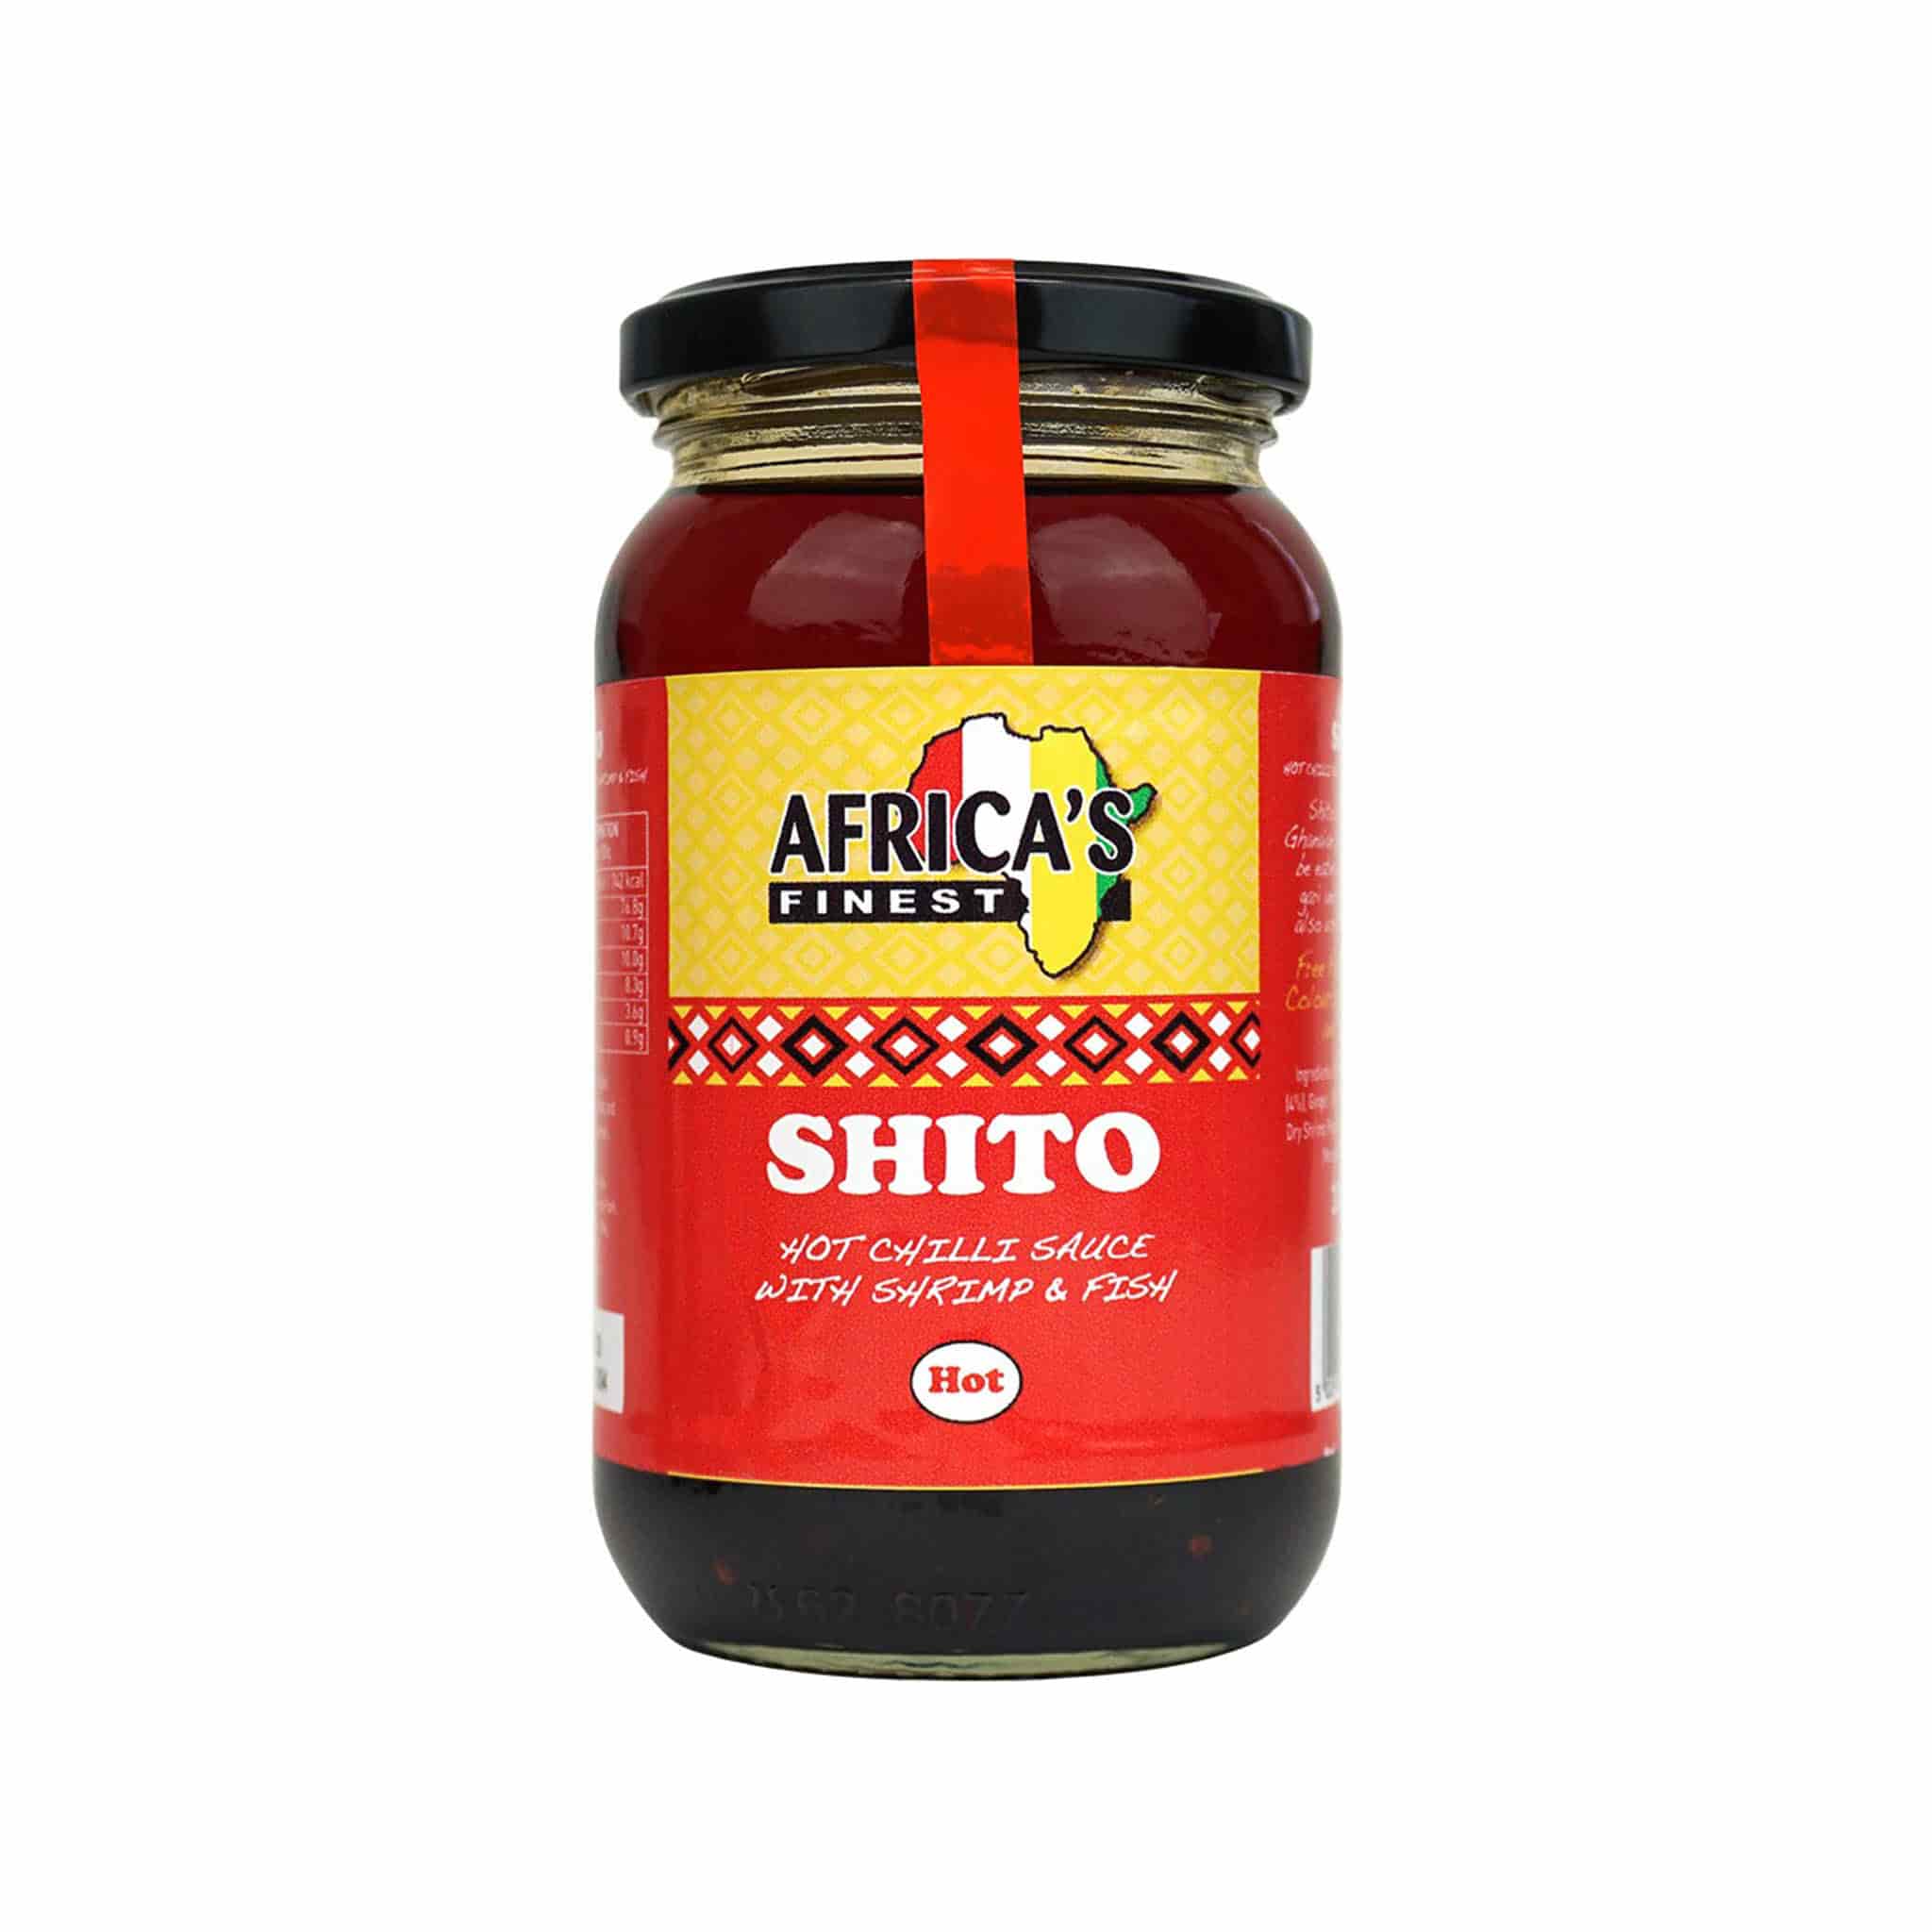 Africas Finest Shito Hot, 330g